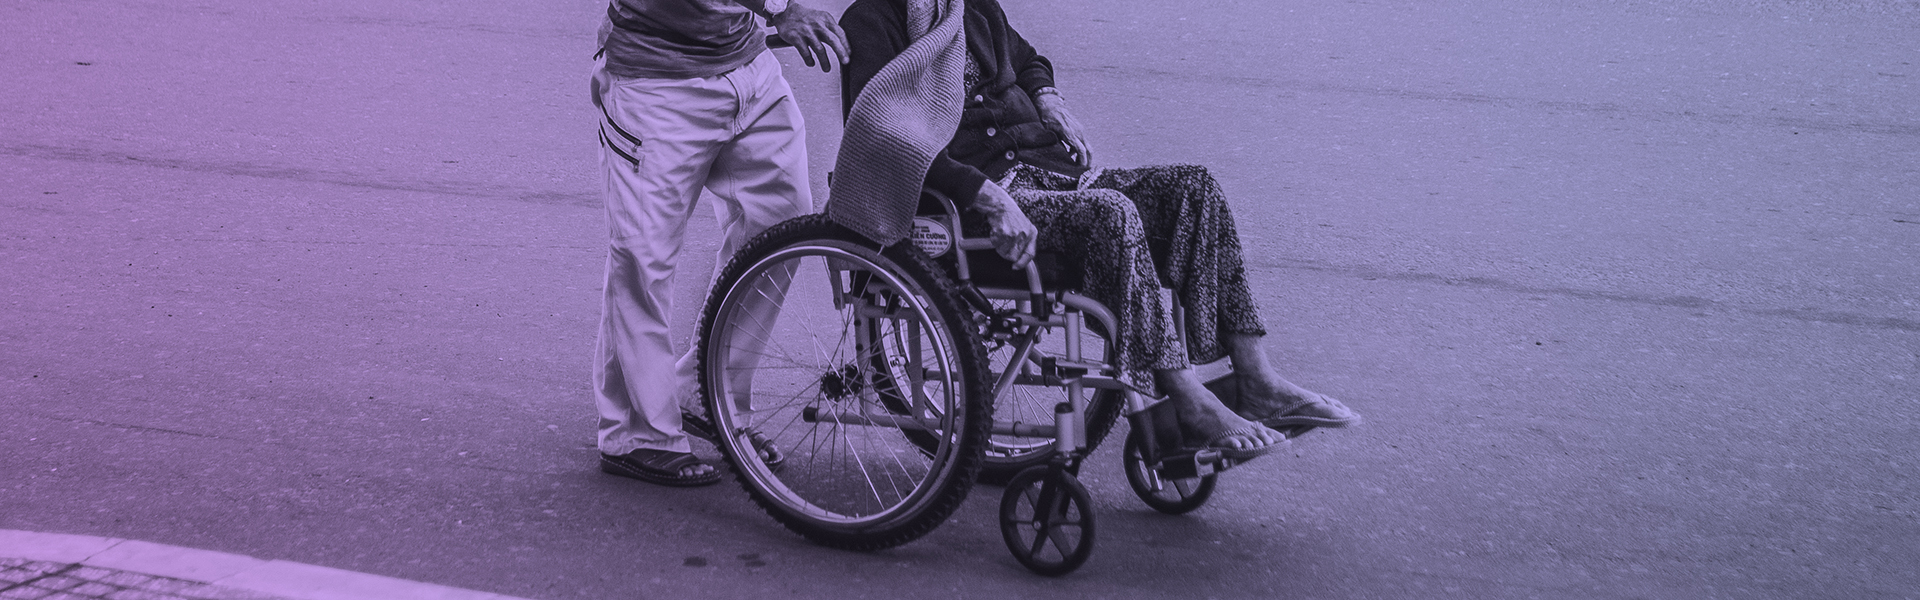 Cropped Stock photograph of a man pushing a person in a wheelchair on a tarmac road